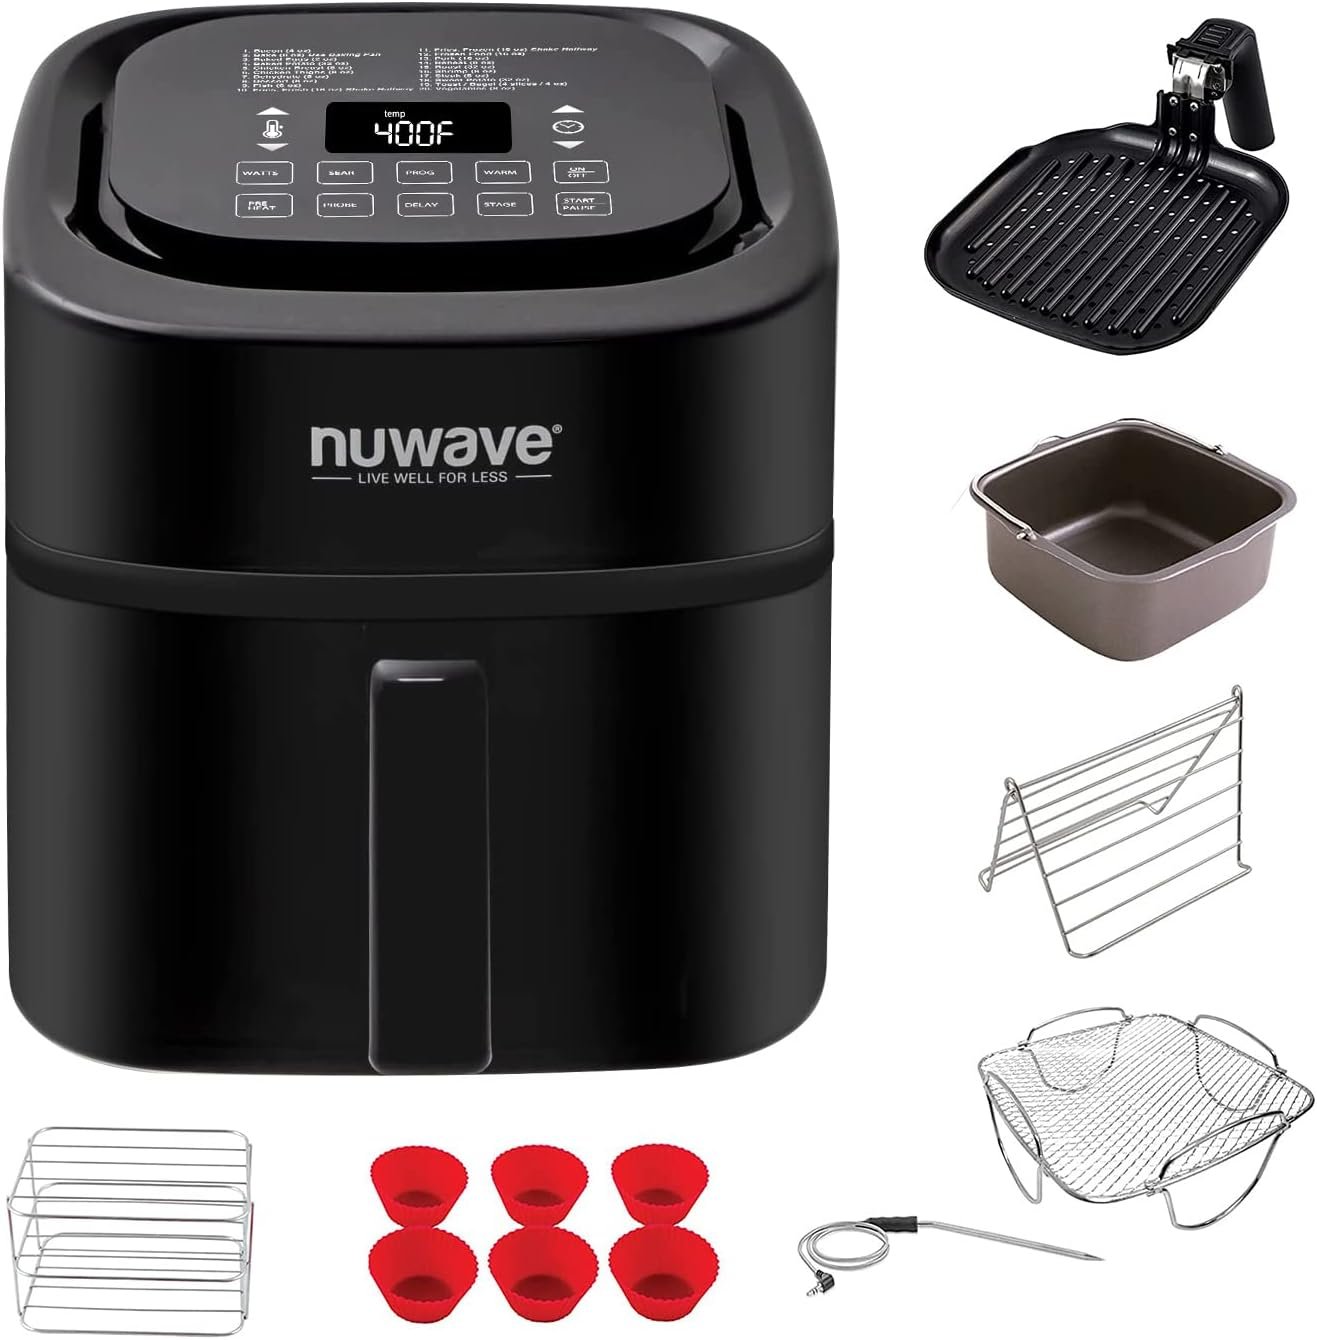 Nuwave Brio 6-Quart Healthy Digital Smart Air Fryer with Probe One-Touch Digital Controls, Advanced Cooking Functions, Removable Divider Insert  Grill Pan (NEW ACCESSORY),Black